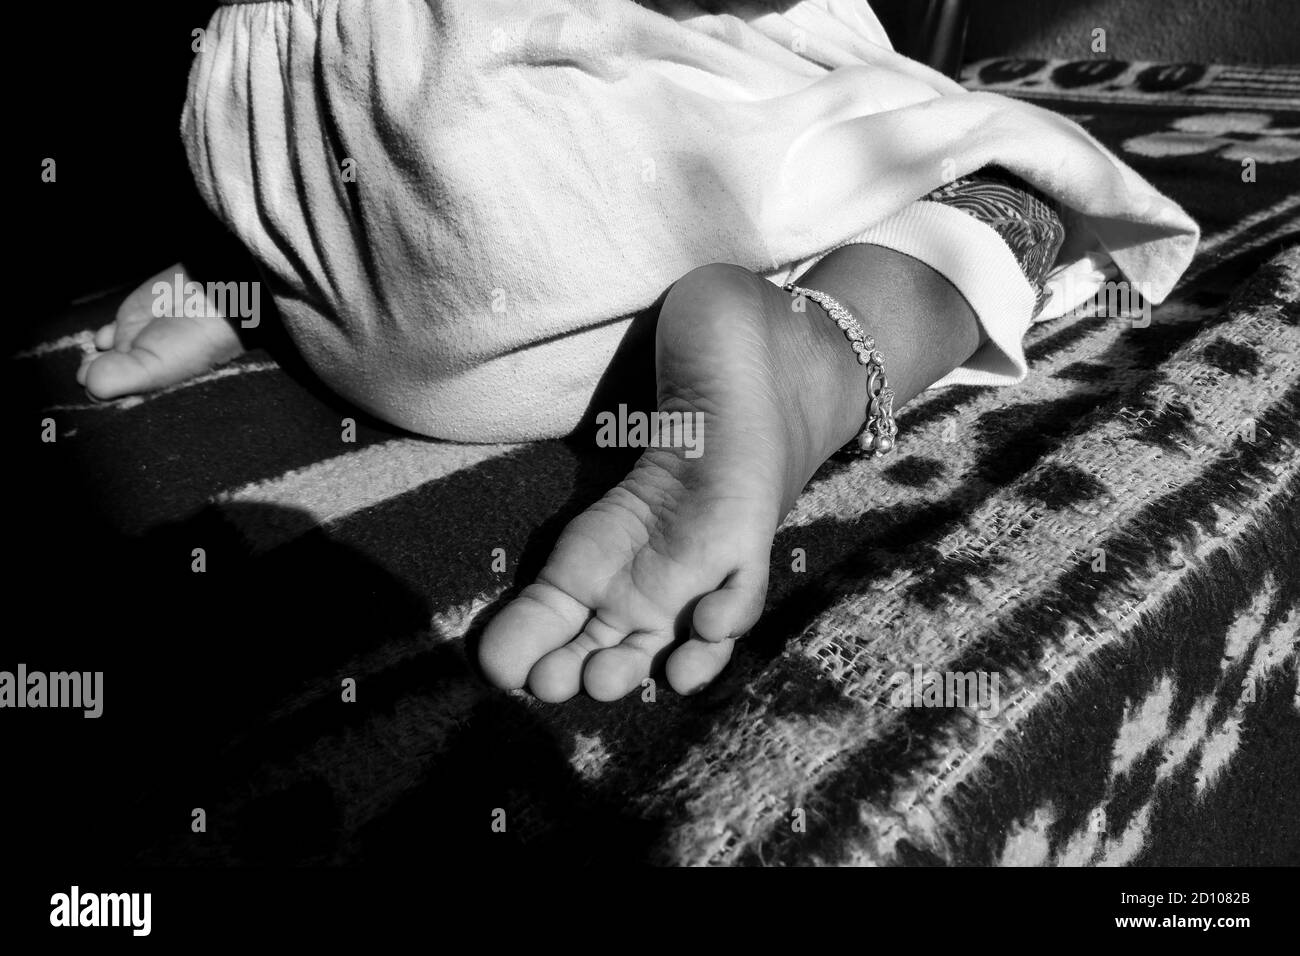 a close view of Indian girl child W sitting position in black & white photo Stock Photo